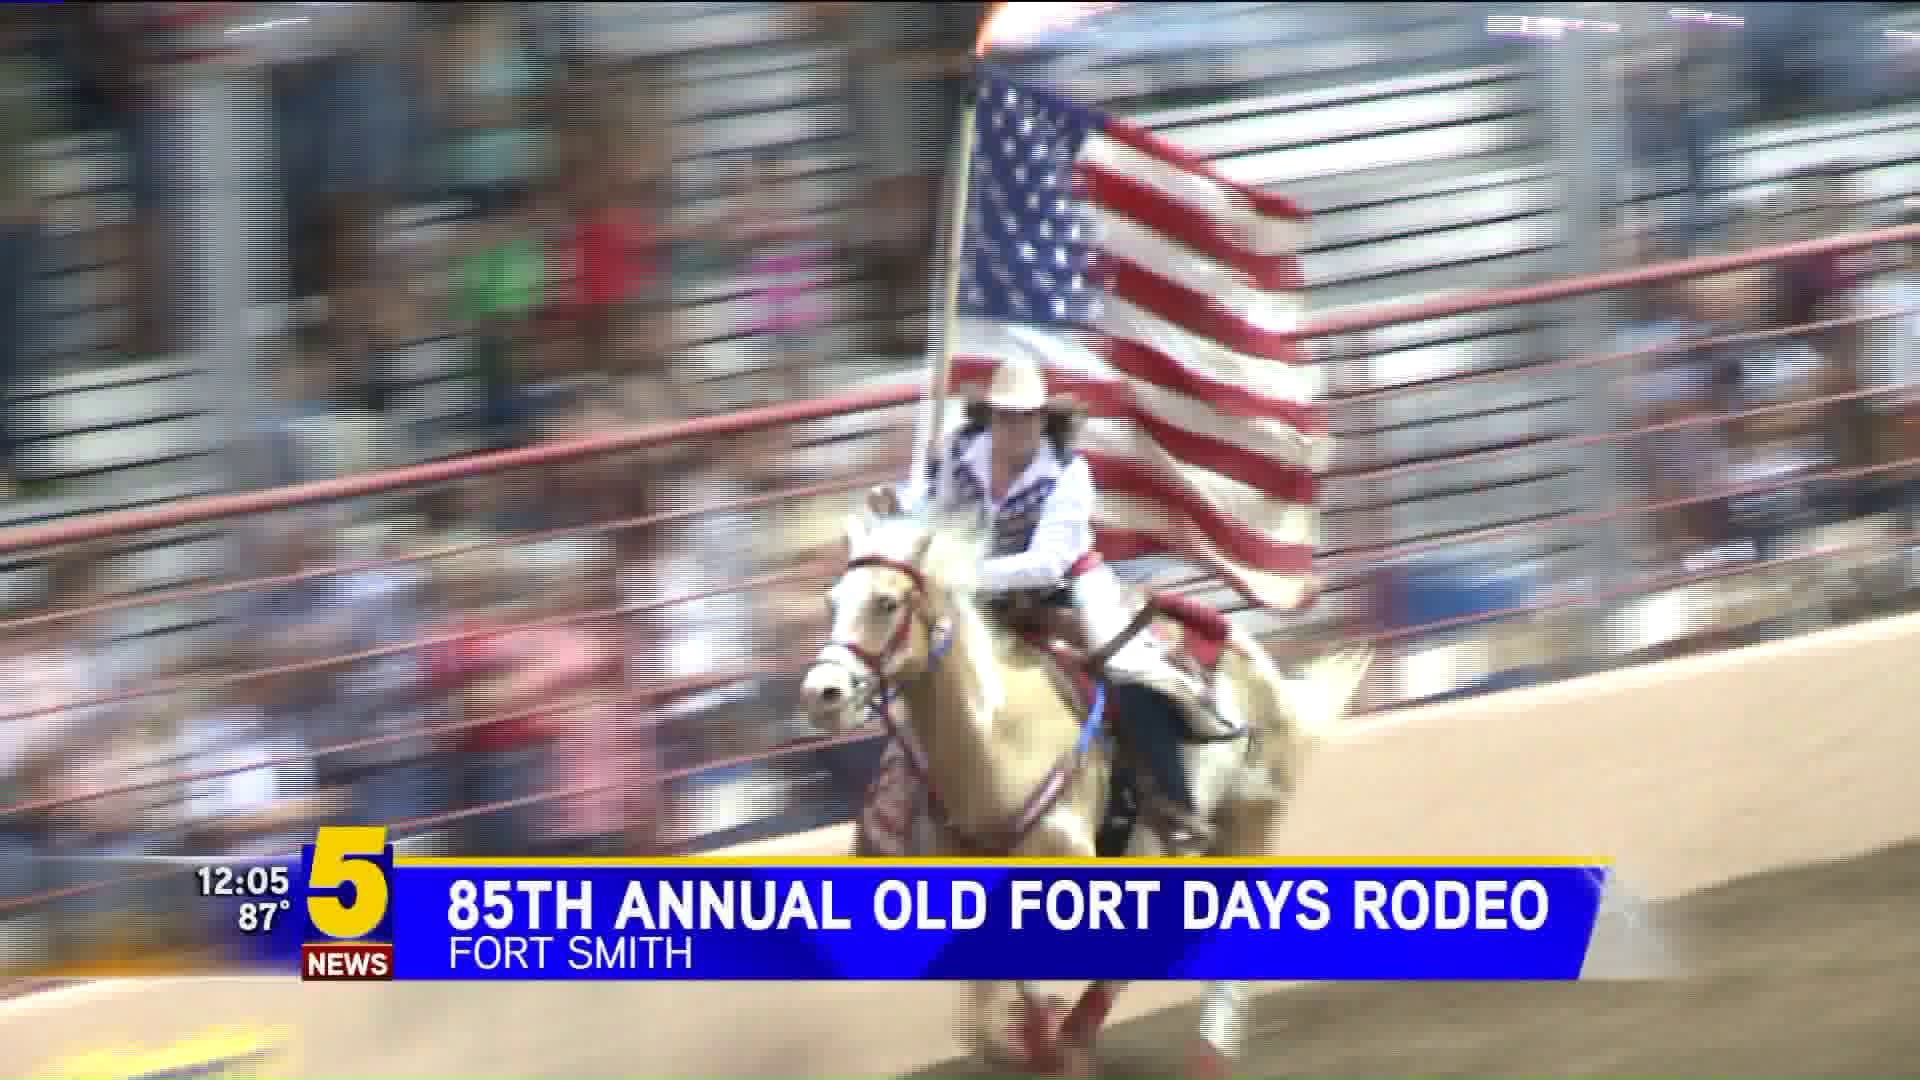 Old Fort Days Rodeo